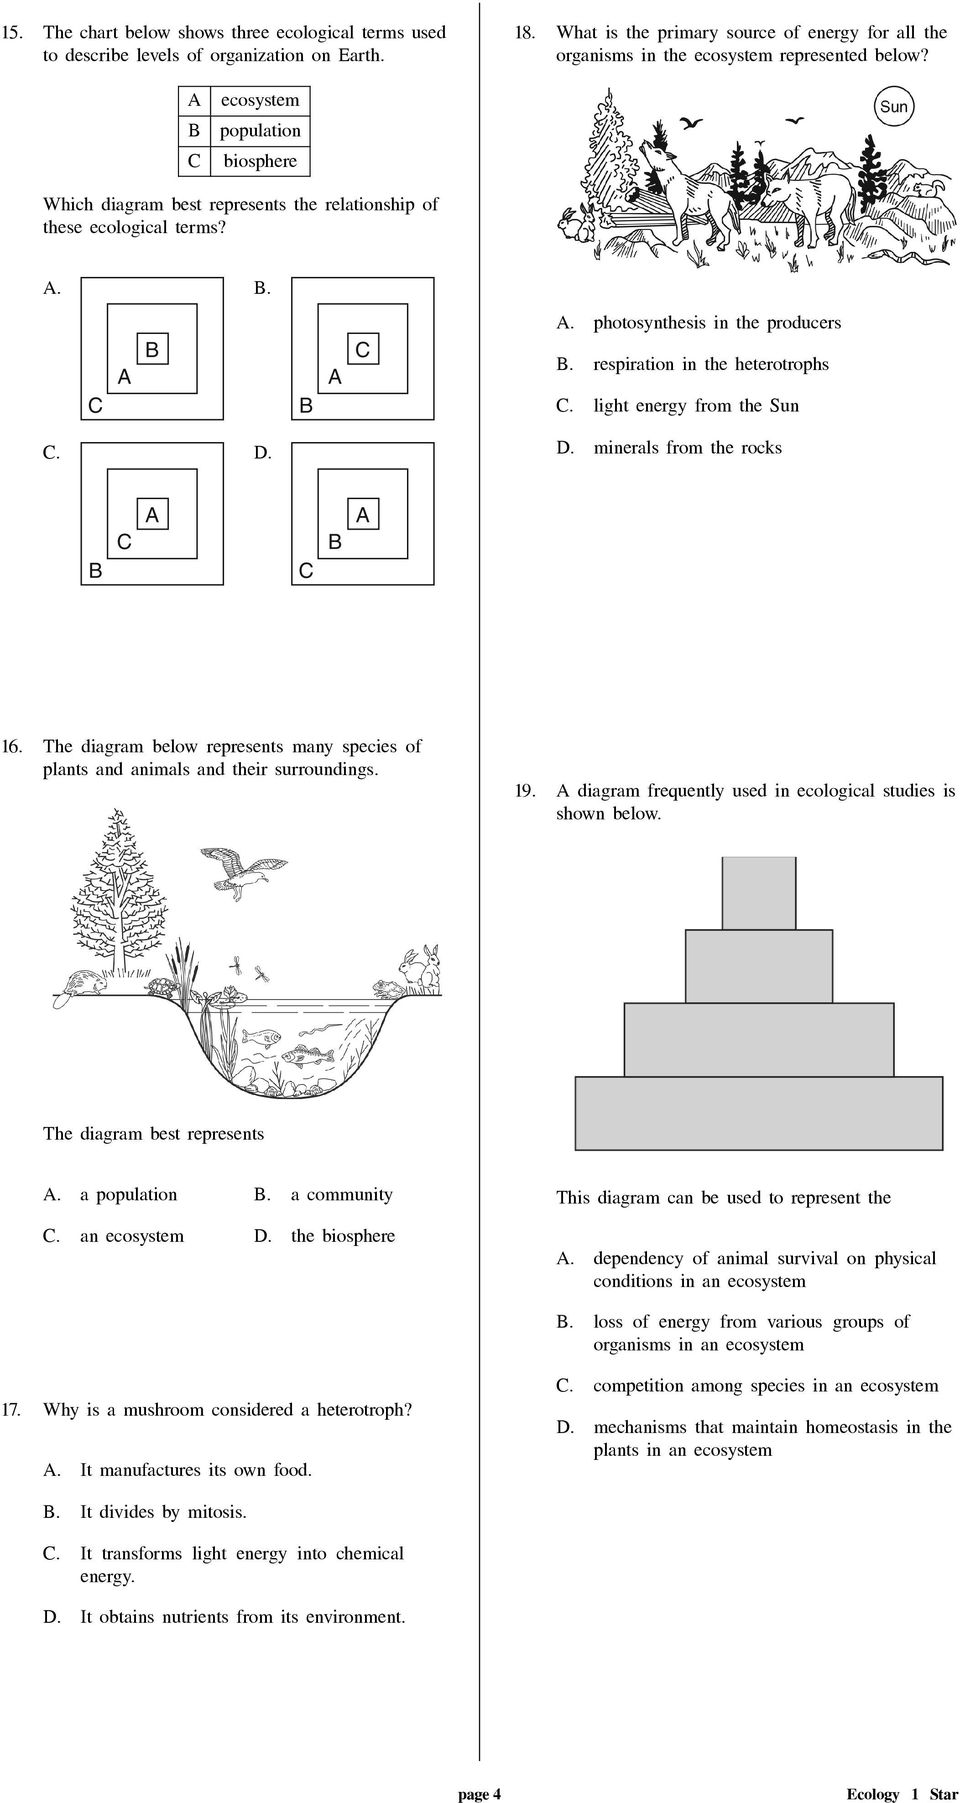 .. minerals from the rocks 16. The diagram below represents many species of plants and animals and their surroundings. 19. diagram frequently used in ecological studies is shown below.